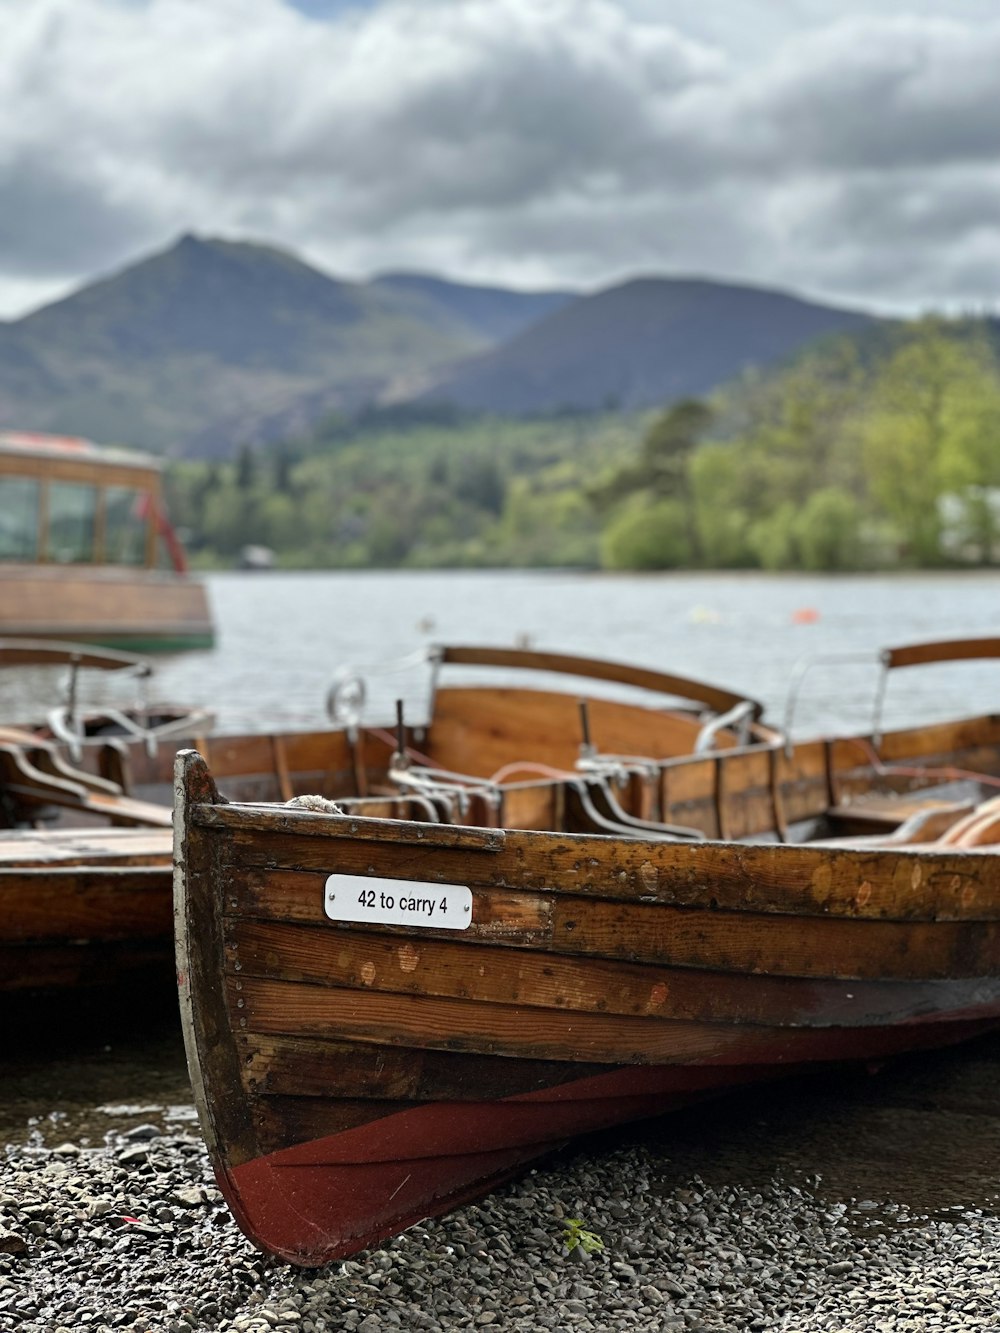 a row of wooden boats sitting on top of a lake